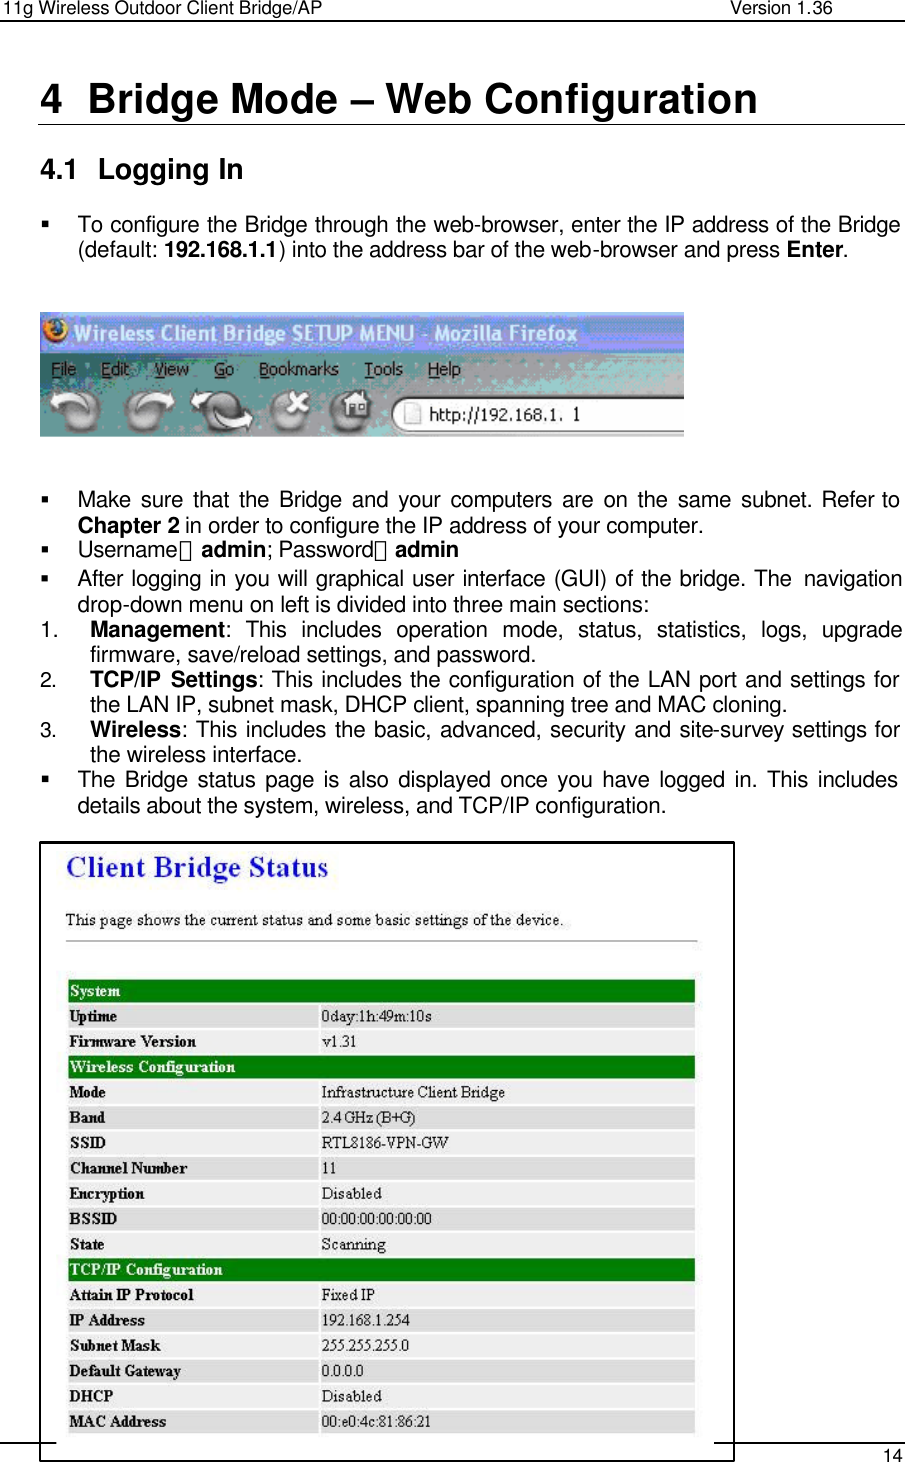 11g Wireless Outdoor Client Bridge/AP                Version 1.36    14  4 Bridge Mode – Web Configuration  4.1 Logging In  § To configure the Bridge through the web-browser, enter the IP address of the Bridge (default: 192.168.1.1) into the address bar of the web-browser and press Enter.       § Make sure that the Bridge and your computers are on the same subnet. Refer to Chapter 2 in order to configure the IP address of your computer. § Username：admin; Password：admin § After logging in you will graphical user interface (GUI) of the bridge. The  navigation drop-down menu on left is divided into three main sections: 1. Management: This includes operation mode, status, statistics, logs, upgrade firmware, save/reload settings, and password.  2. TCP/IP Settings: This includes the configuration of the LAN port and settings for the LAN IP, subnet mask, DHCP client, spanning tree and MAC cloning.  3. Wireless: This includes the basic, advanced, security and site-survey settings for the wireless interface.  § The Bridge status page is also displayed once you have logged in. This includes details about the system, wireless, and TCP/IP configuration.                          